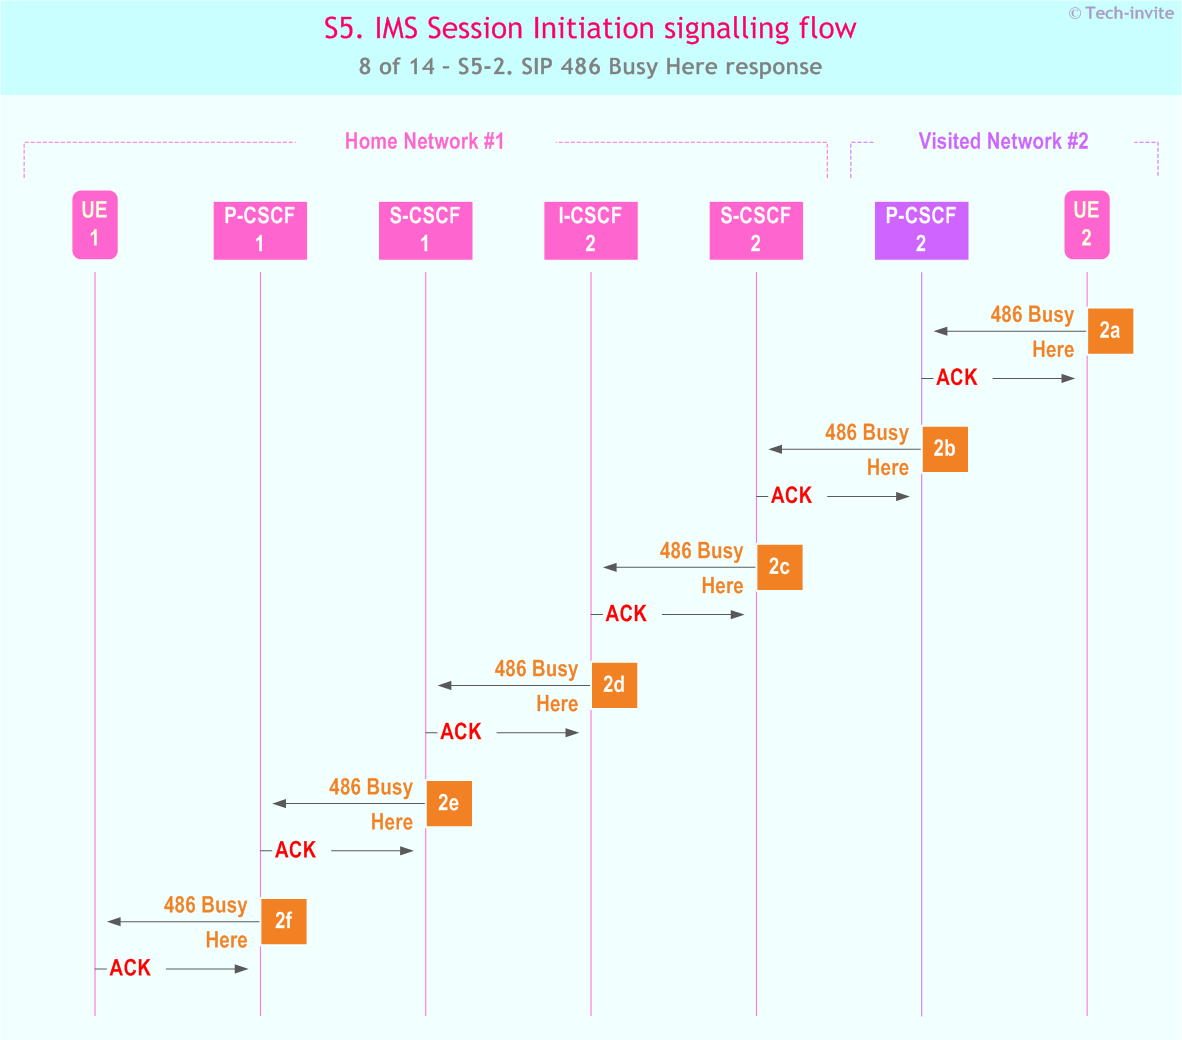 IMS S5 signalling flow - Session Initiation: Mobile origination and termination in home network, but terminating UE roaming and busy - sequence chart for IMS S5-2. SIP 486 Busy Here response